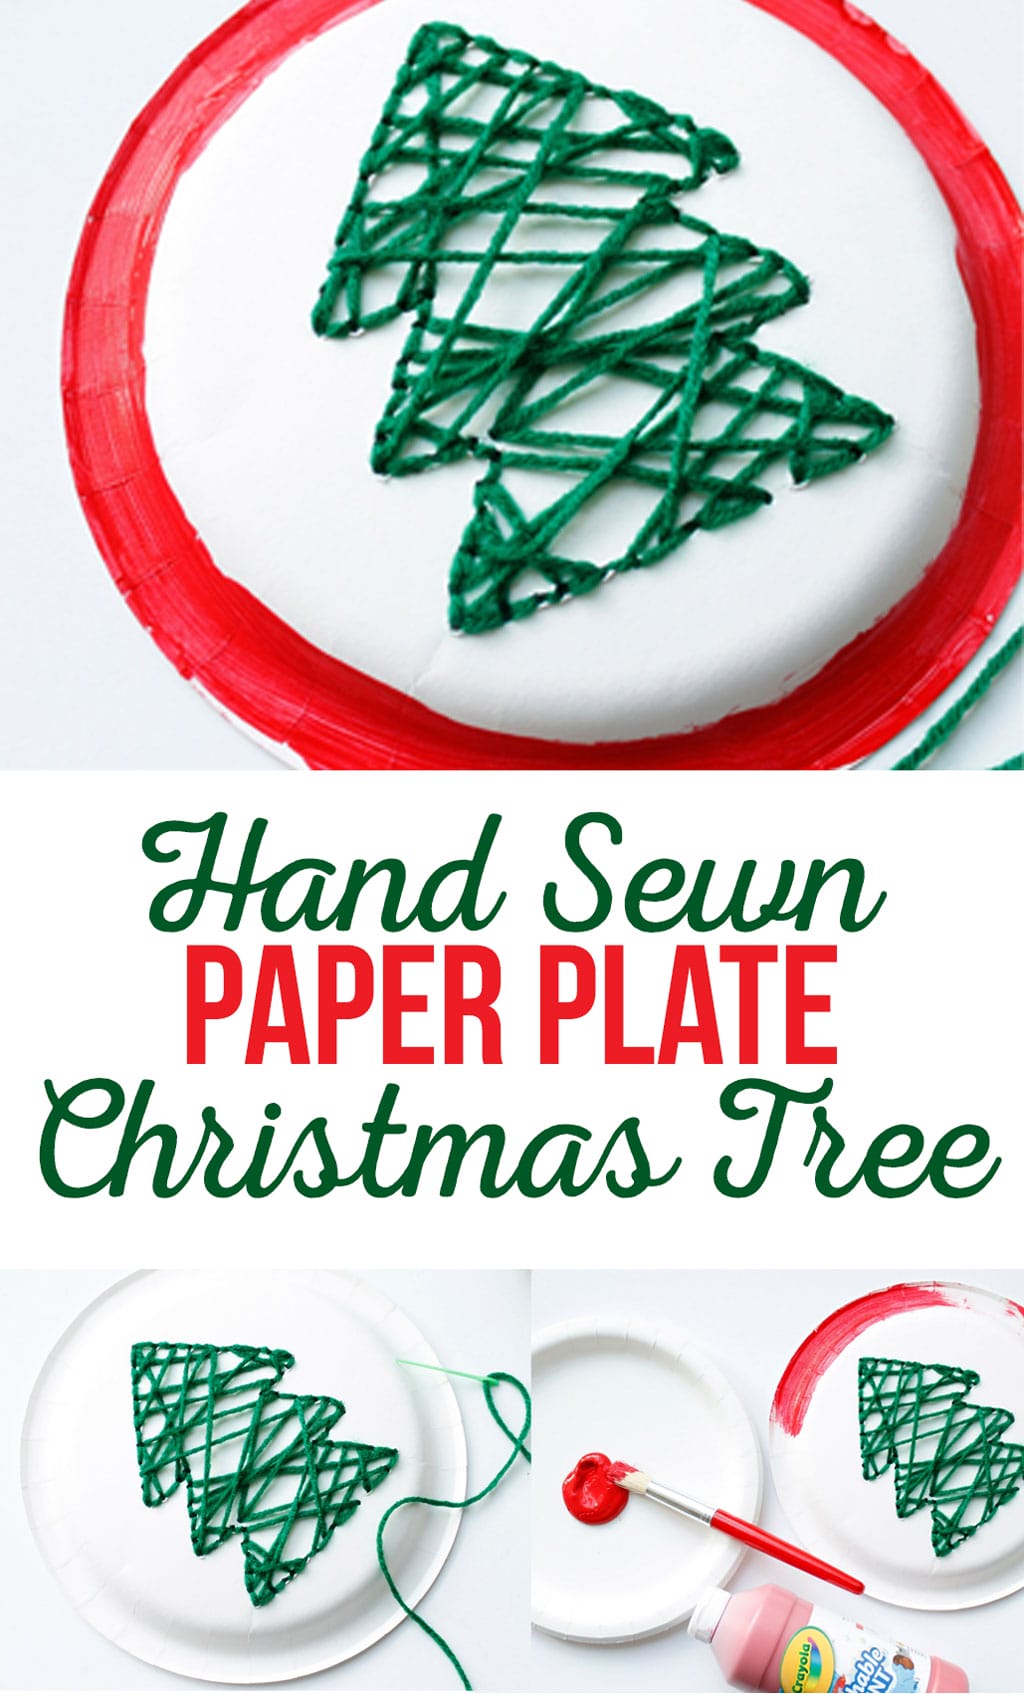 Hand-Sewn Paper Plate Christmas Tree Craft for kids.